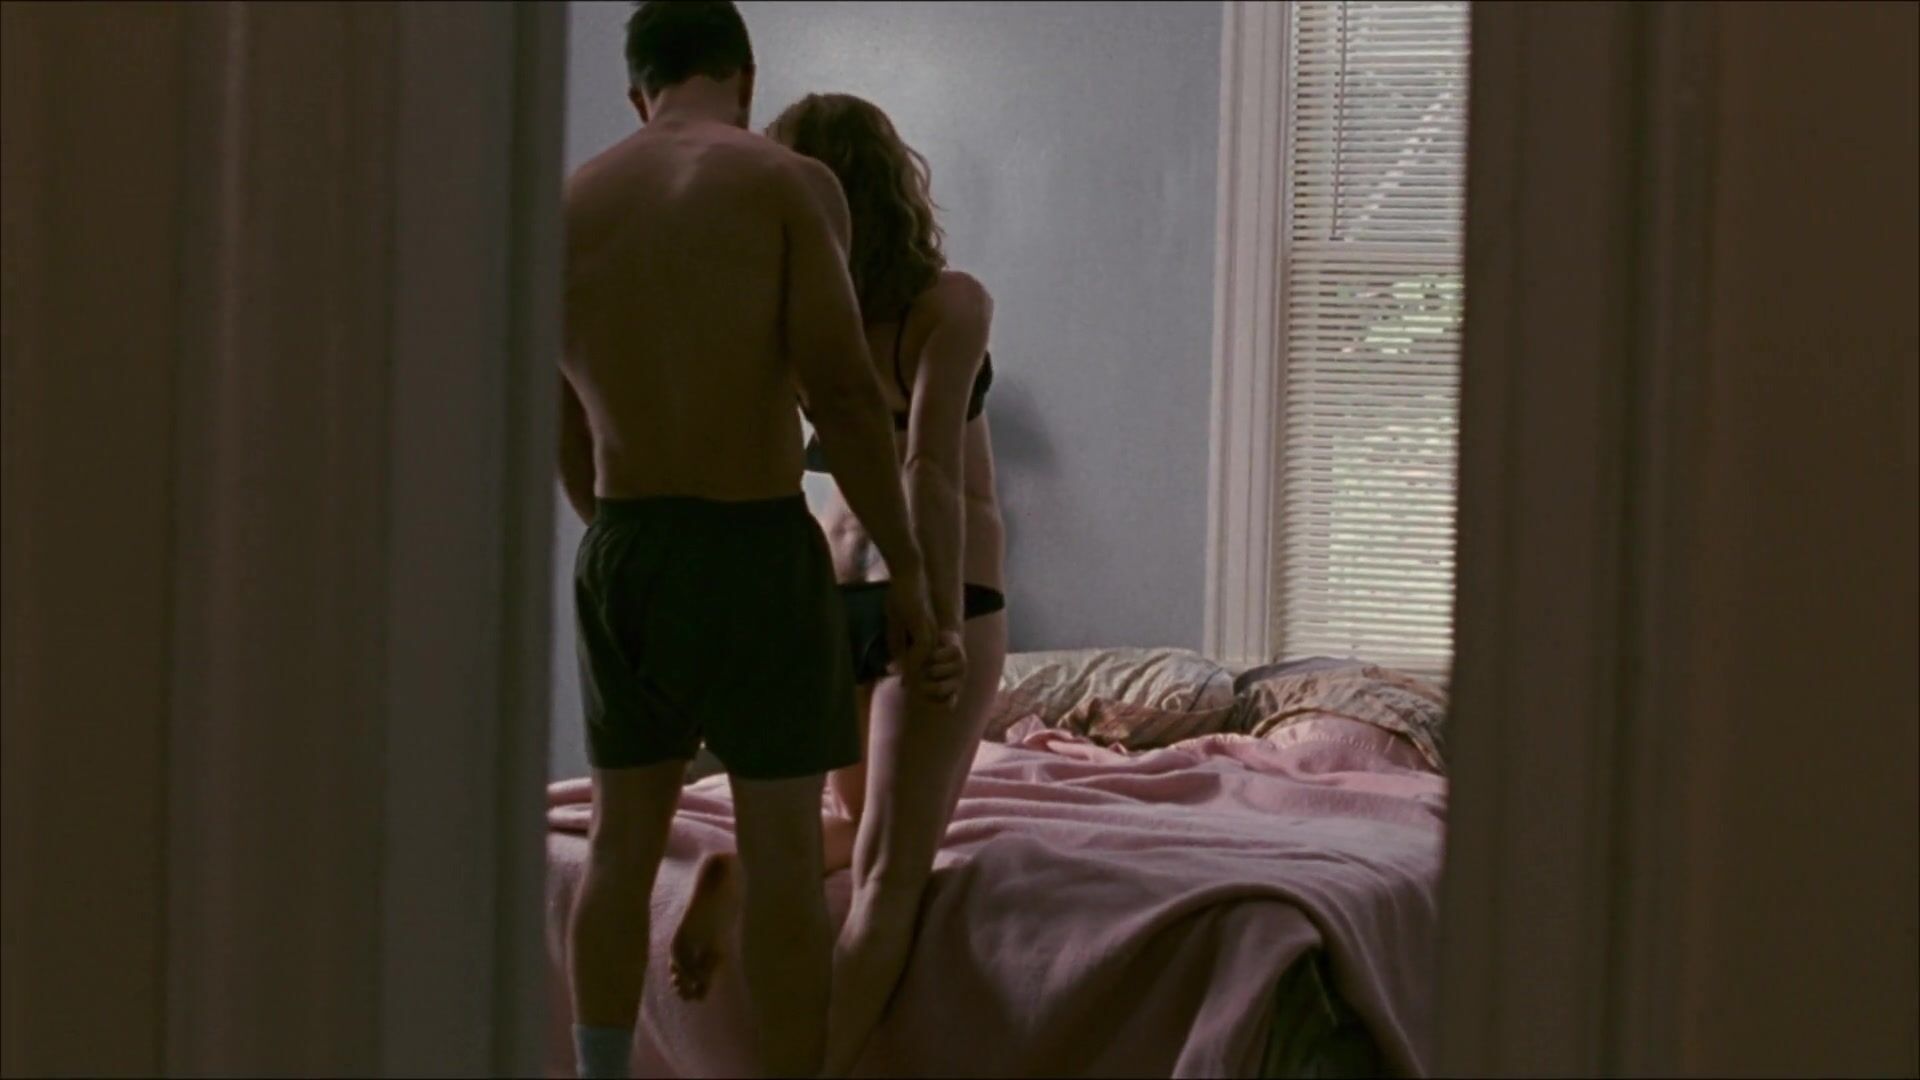 Yqchat Man takes Amy Adams to bed but fails to bonk her in nude scene from The Fighter (2010) Gayporn